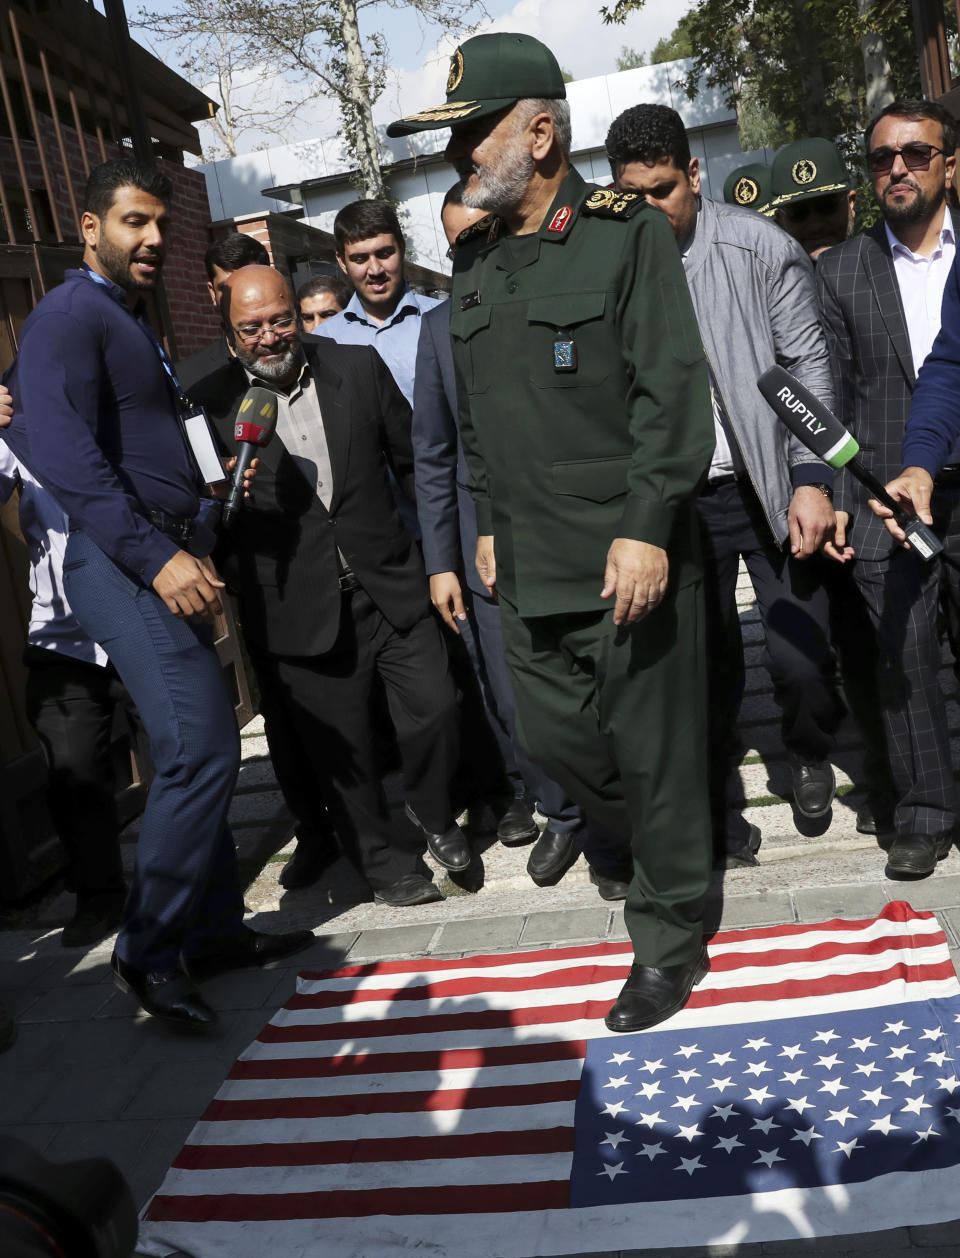 Chief of Iran's Revolutionary Guard Gen. Hossein Salami attends a ceremony to unveil new anti-U.S. murals painted on the walls of former U.S. embassy in Tehran, Iran, as he steps on the U.S. flag. Saturday, Nov. 2, 2019. Anti-U.S. works of graphics is the main theme of the wall murals painted by a team of artists ahead of the 40th anniversary of the takeover of the U.S. diplomatic post by revolutionary students. (AP Photo/Vahid Salemi)